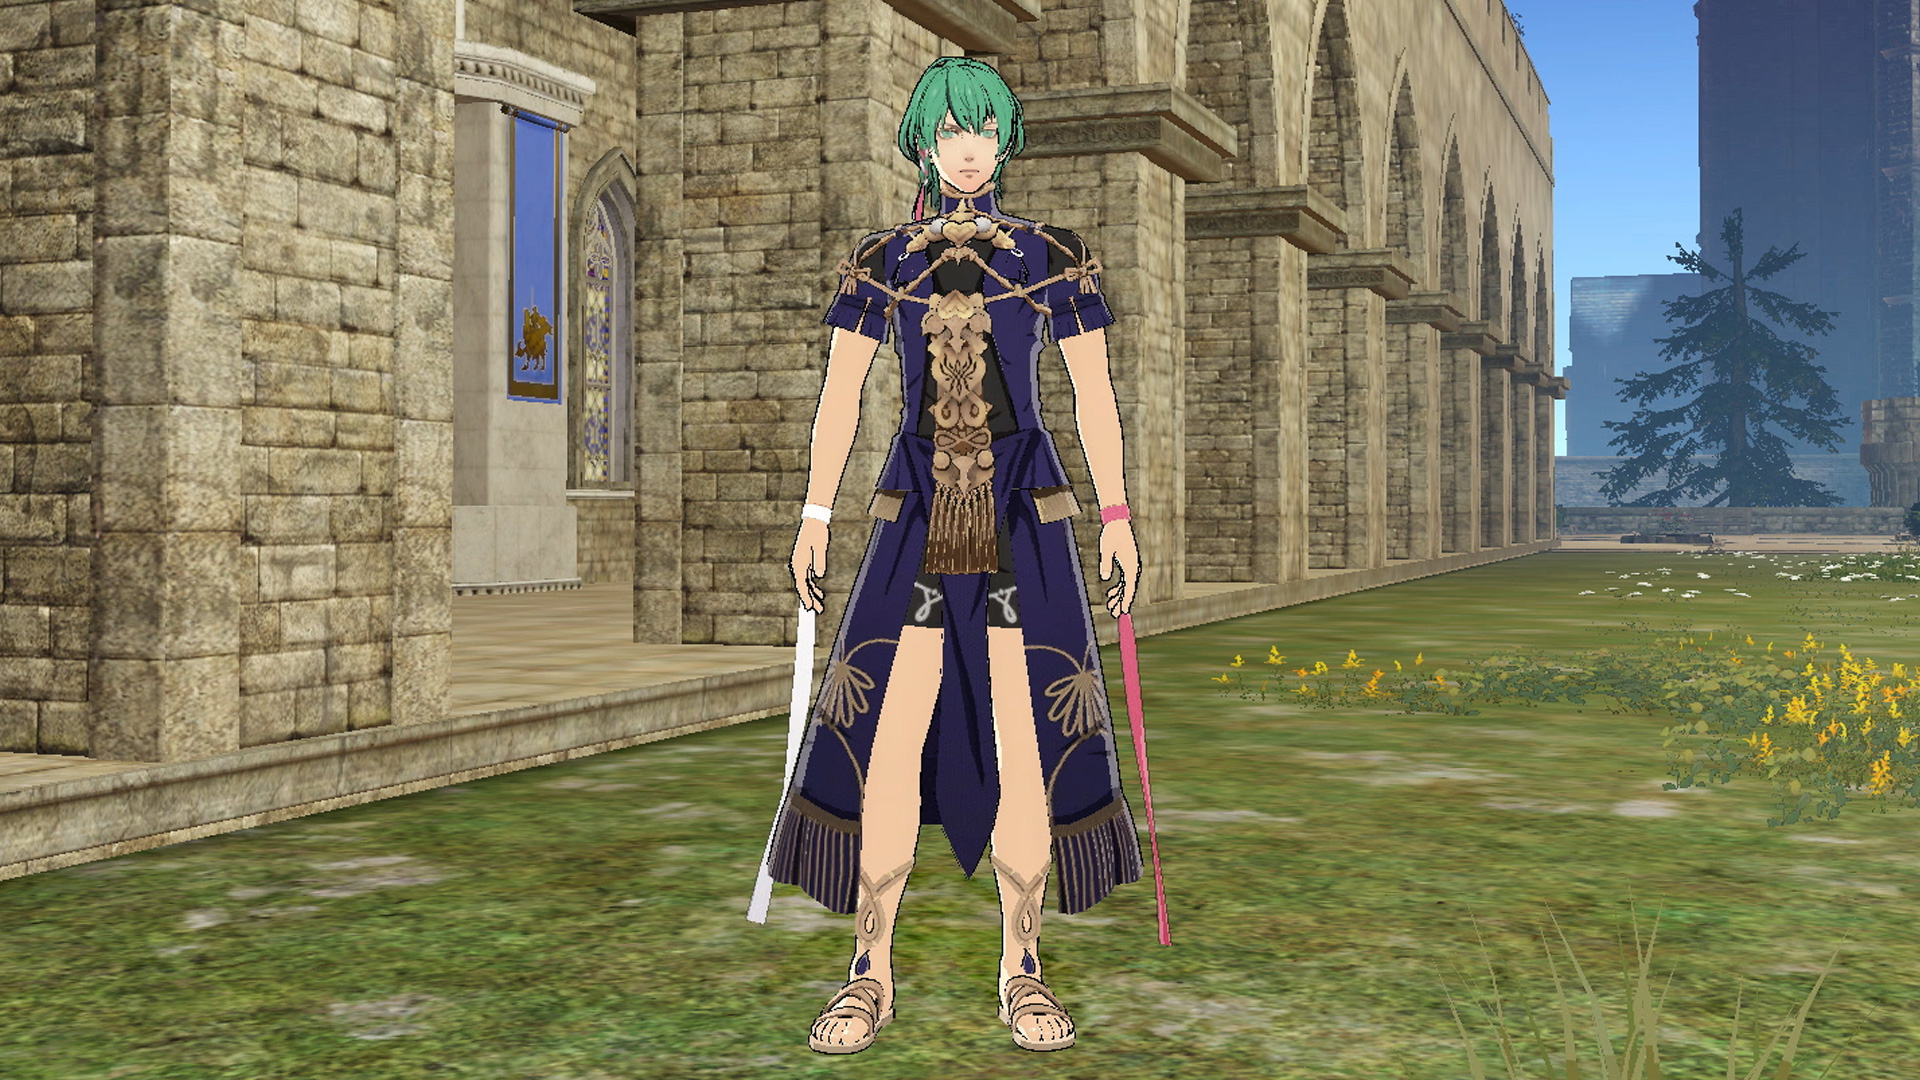 Fire Emblem: Three Houses adds 'Sothis Regalia' outfit for Byleth...